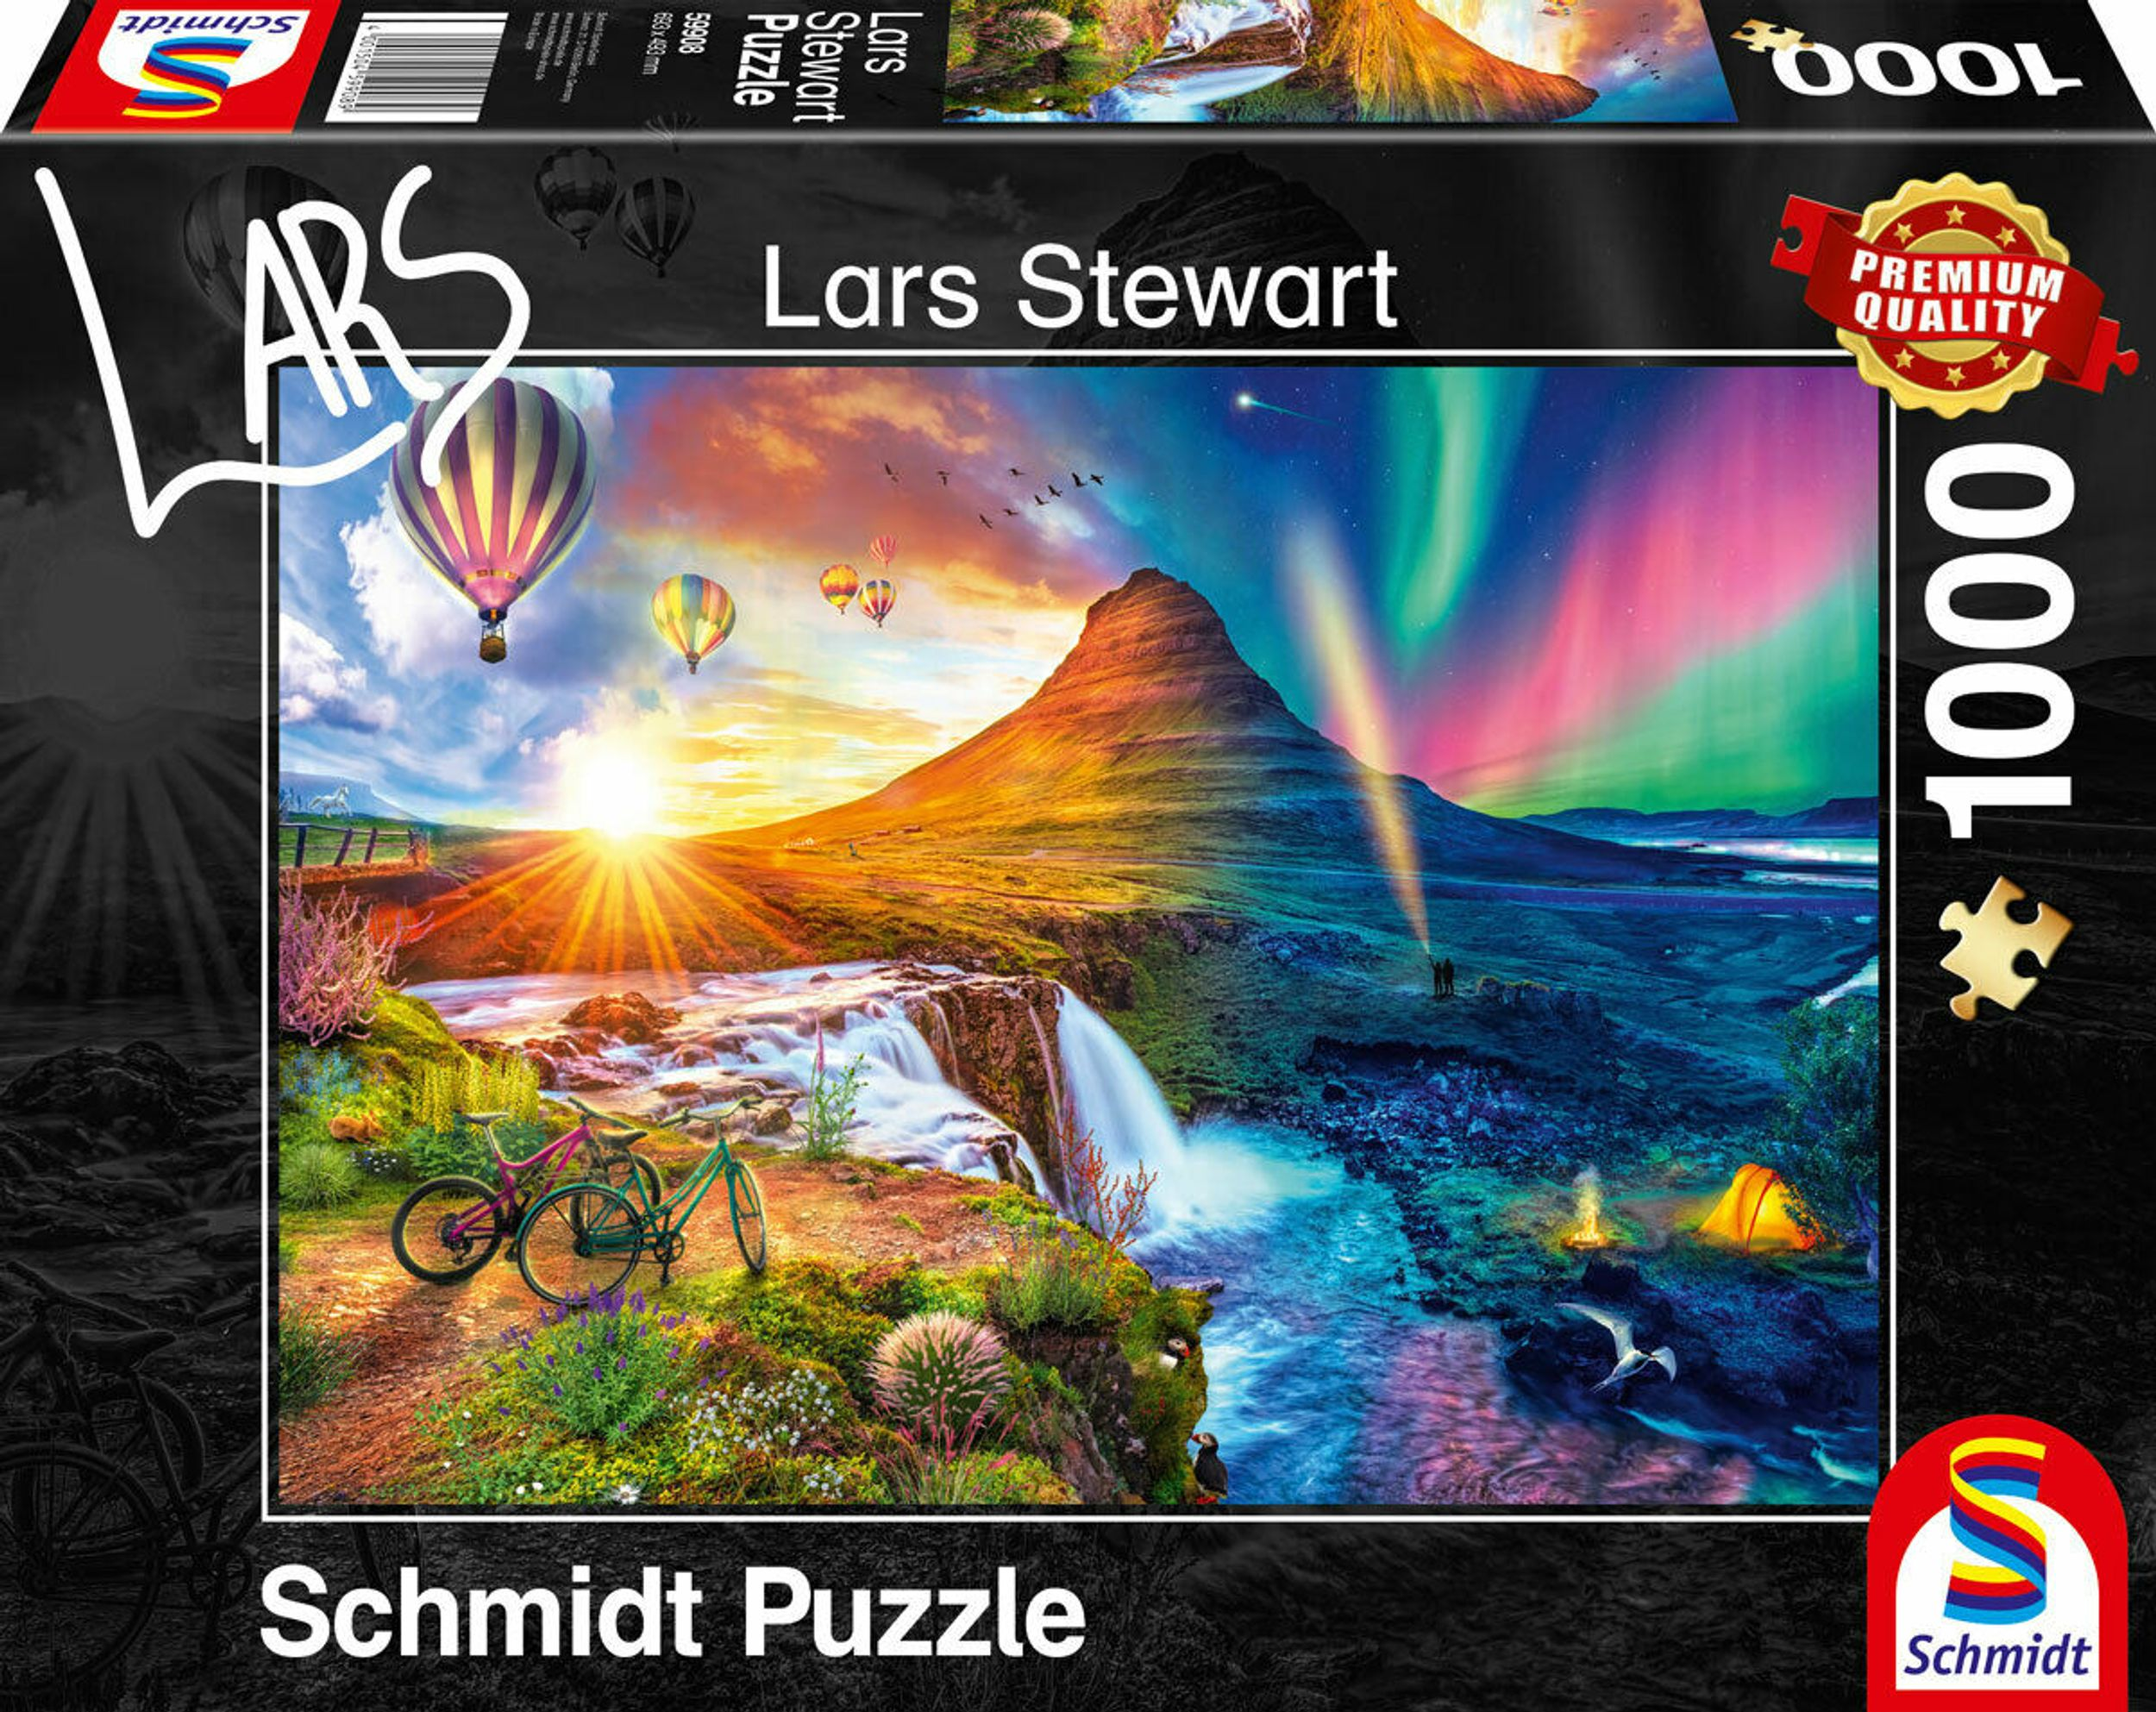 SCHMIDT SPIELE Island Puzzle Day Night and